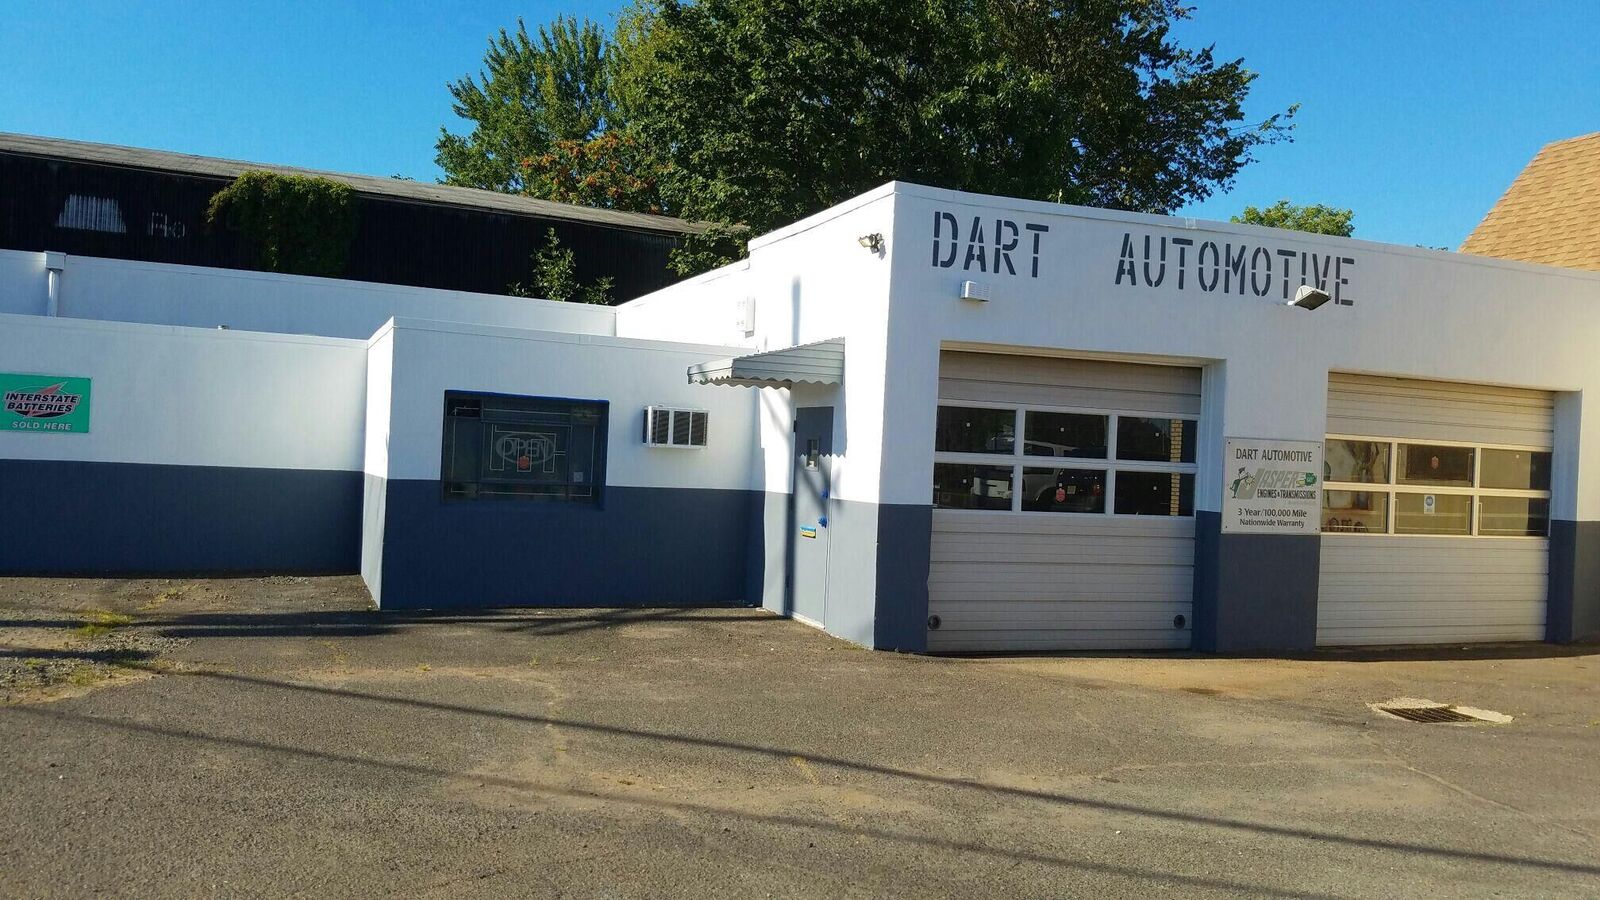 Commercial Retail Painting of Dart Automotive by CertaPro Painters of Mountainside, NJ